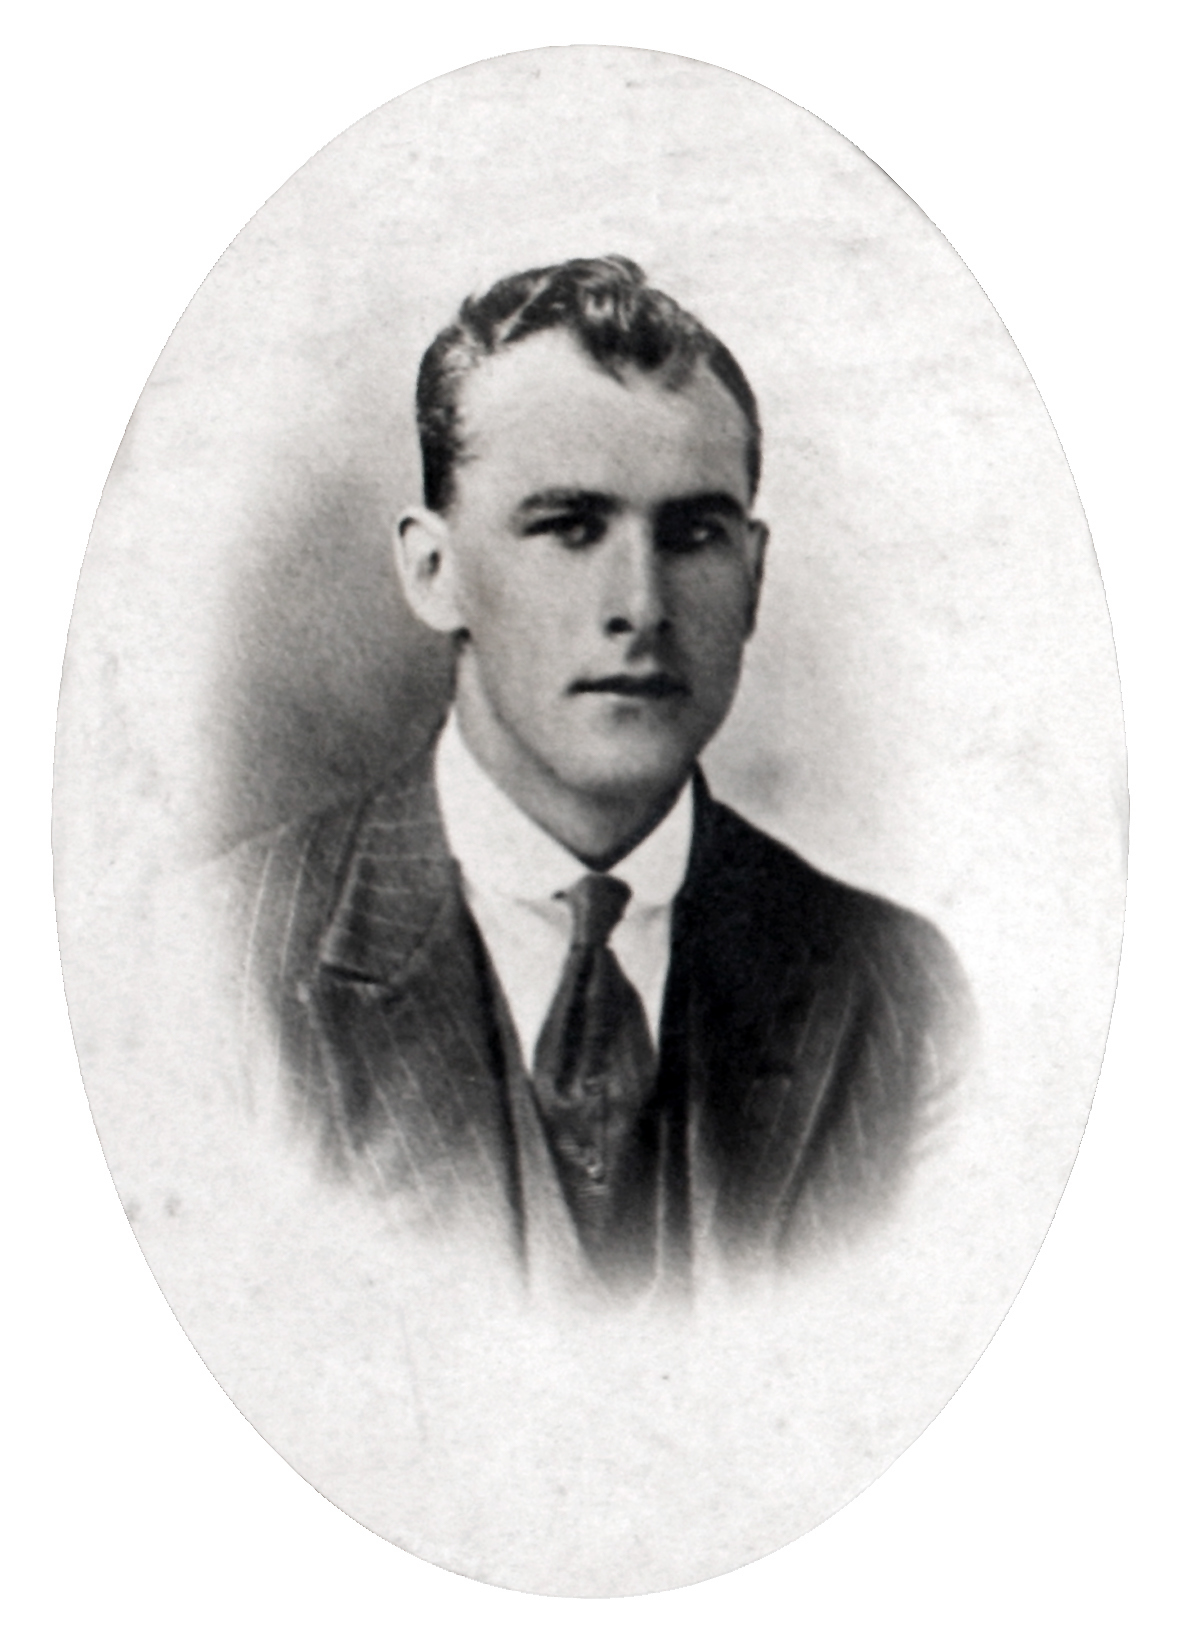 an old black and white po of a young man in suit and tie